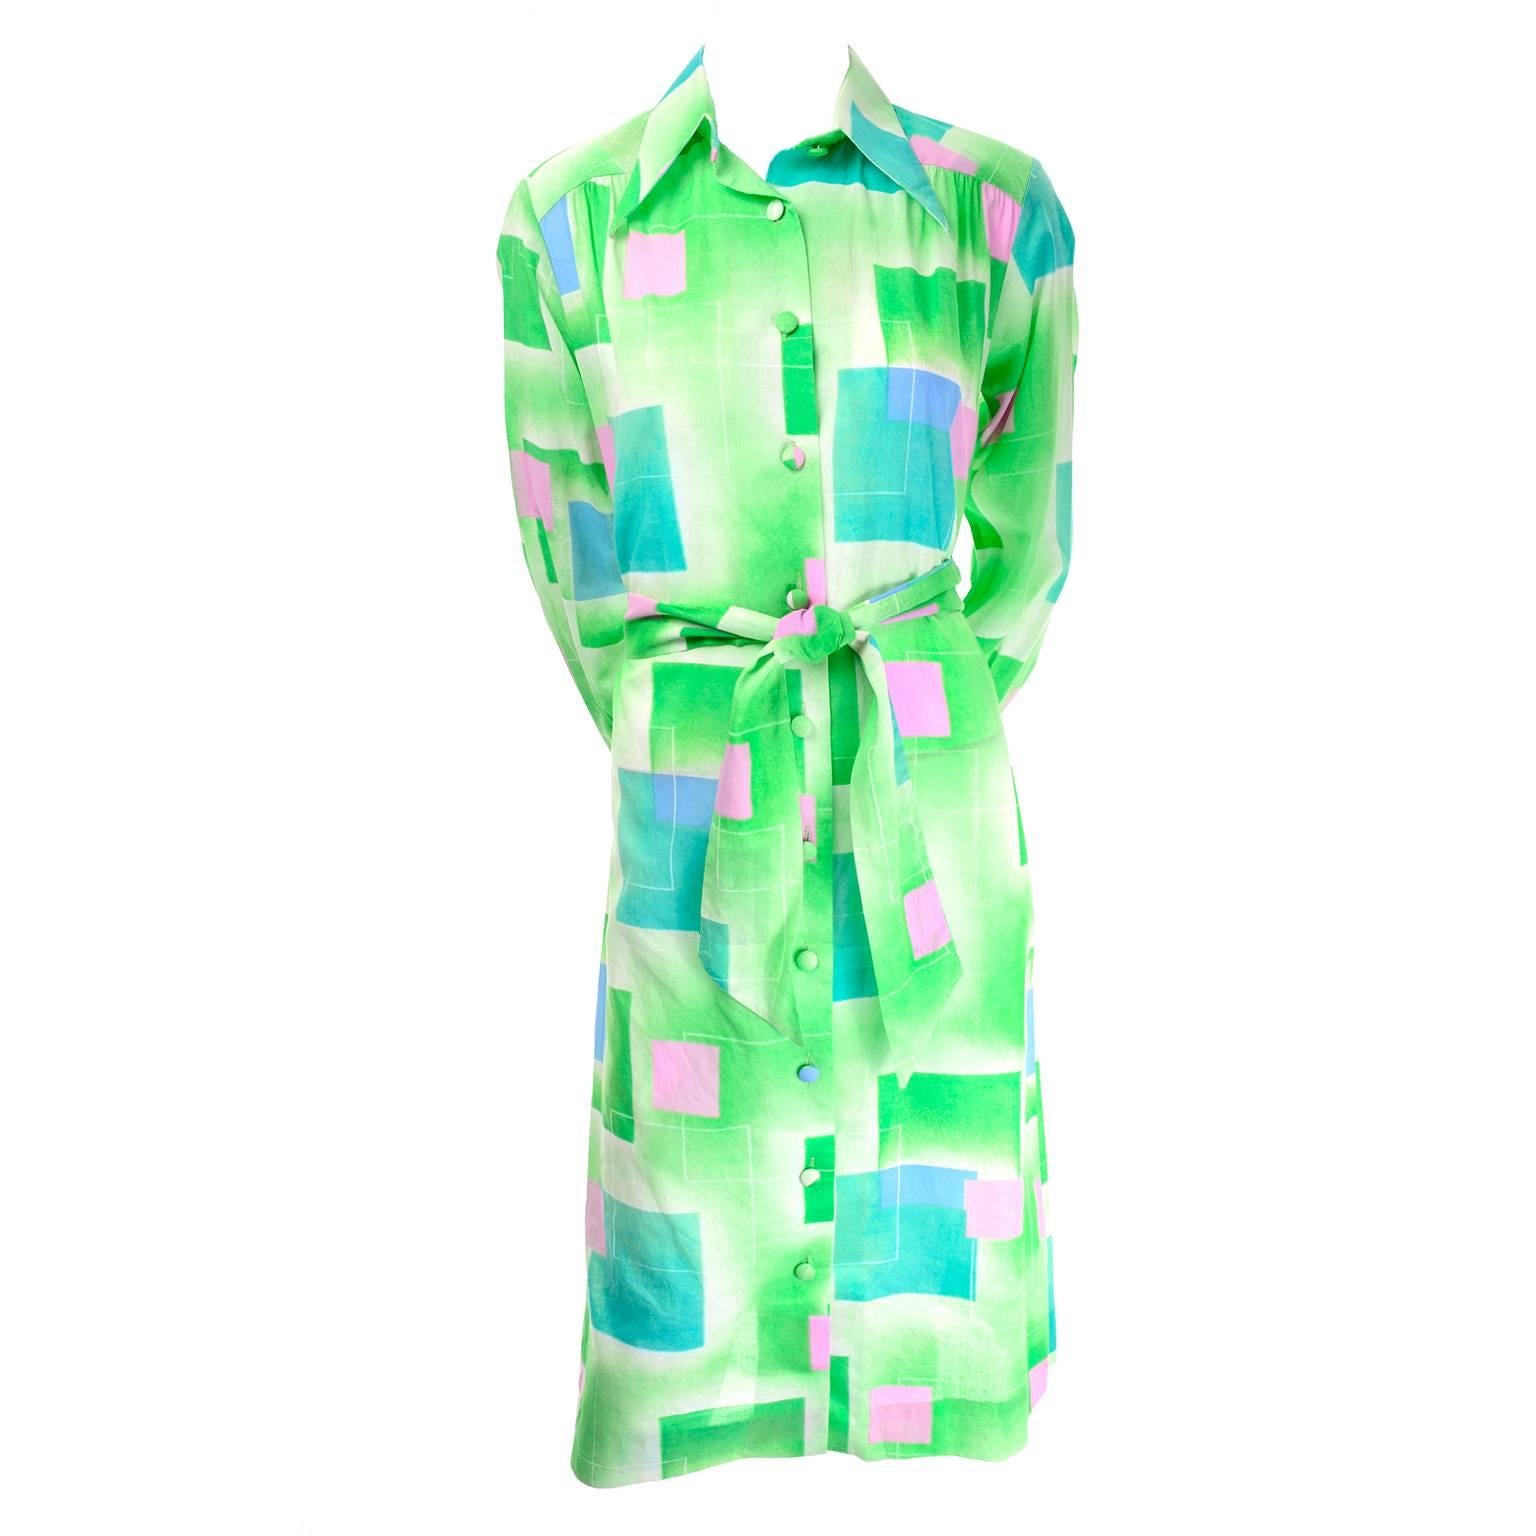 1970s Lanvin Vintage Dress in Geometric Graphic Green Blue and Pink Print 8/10